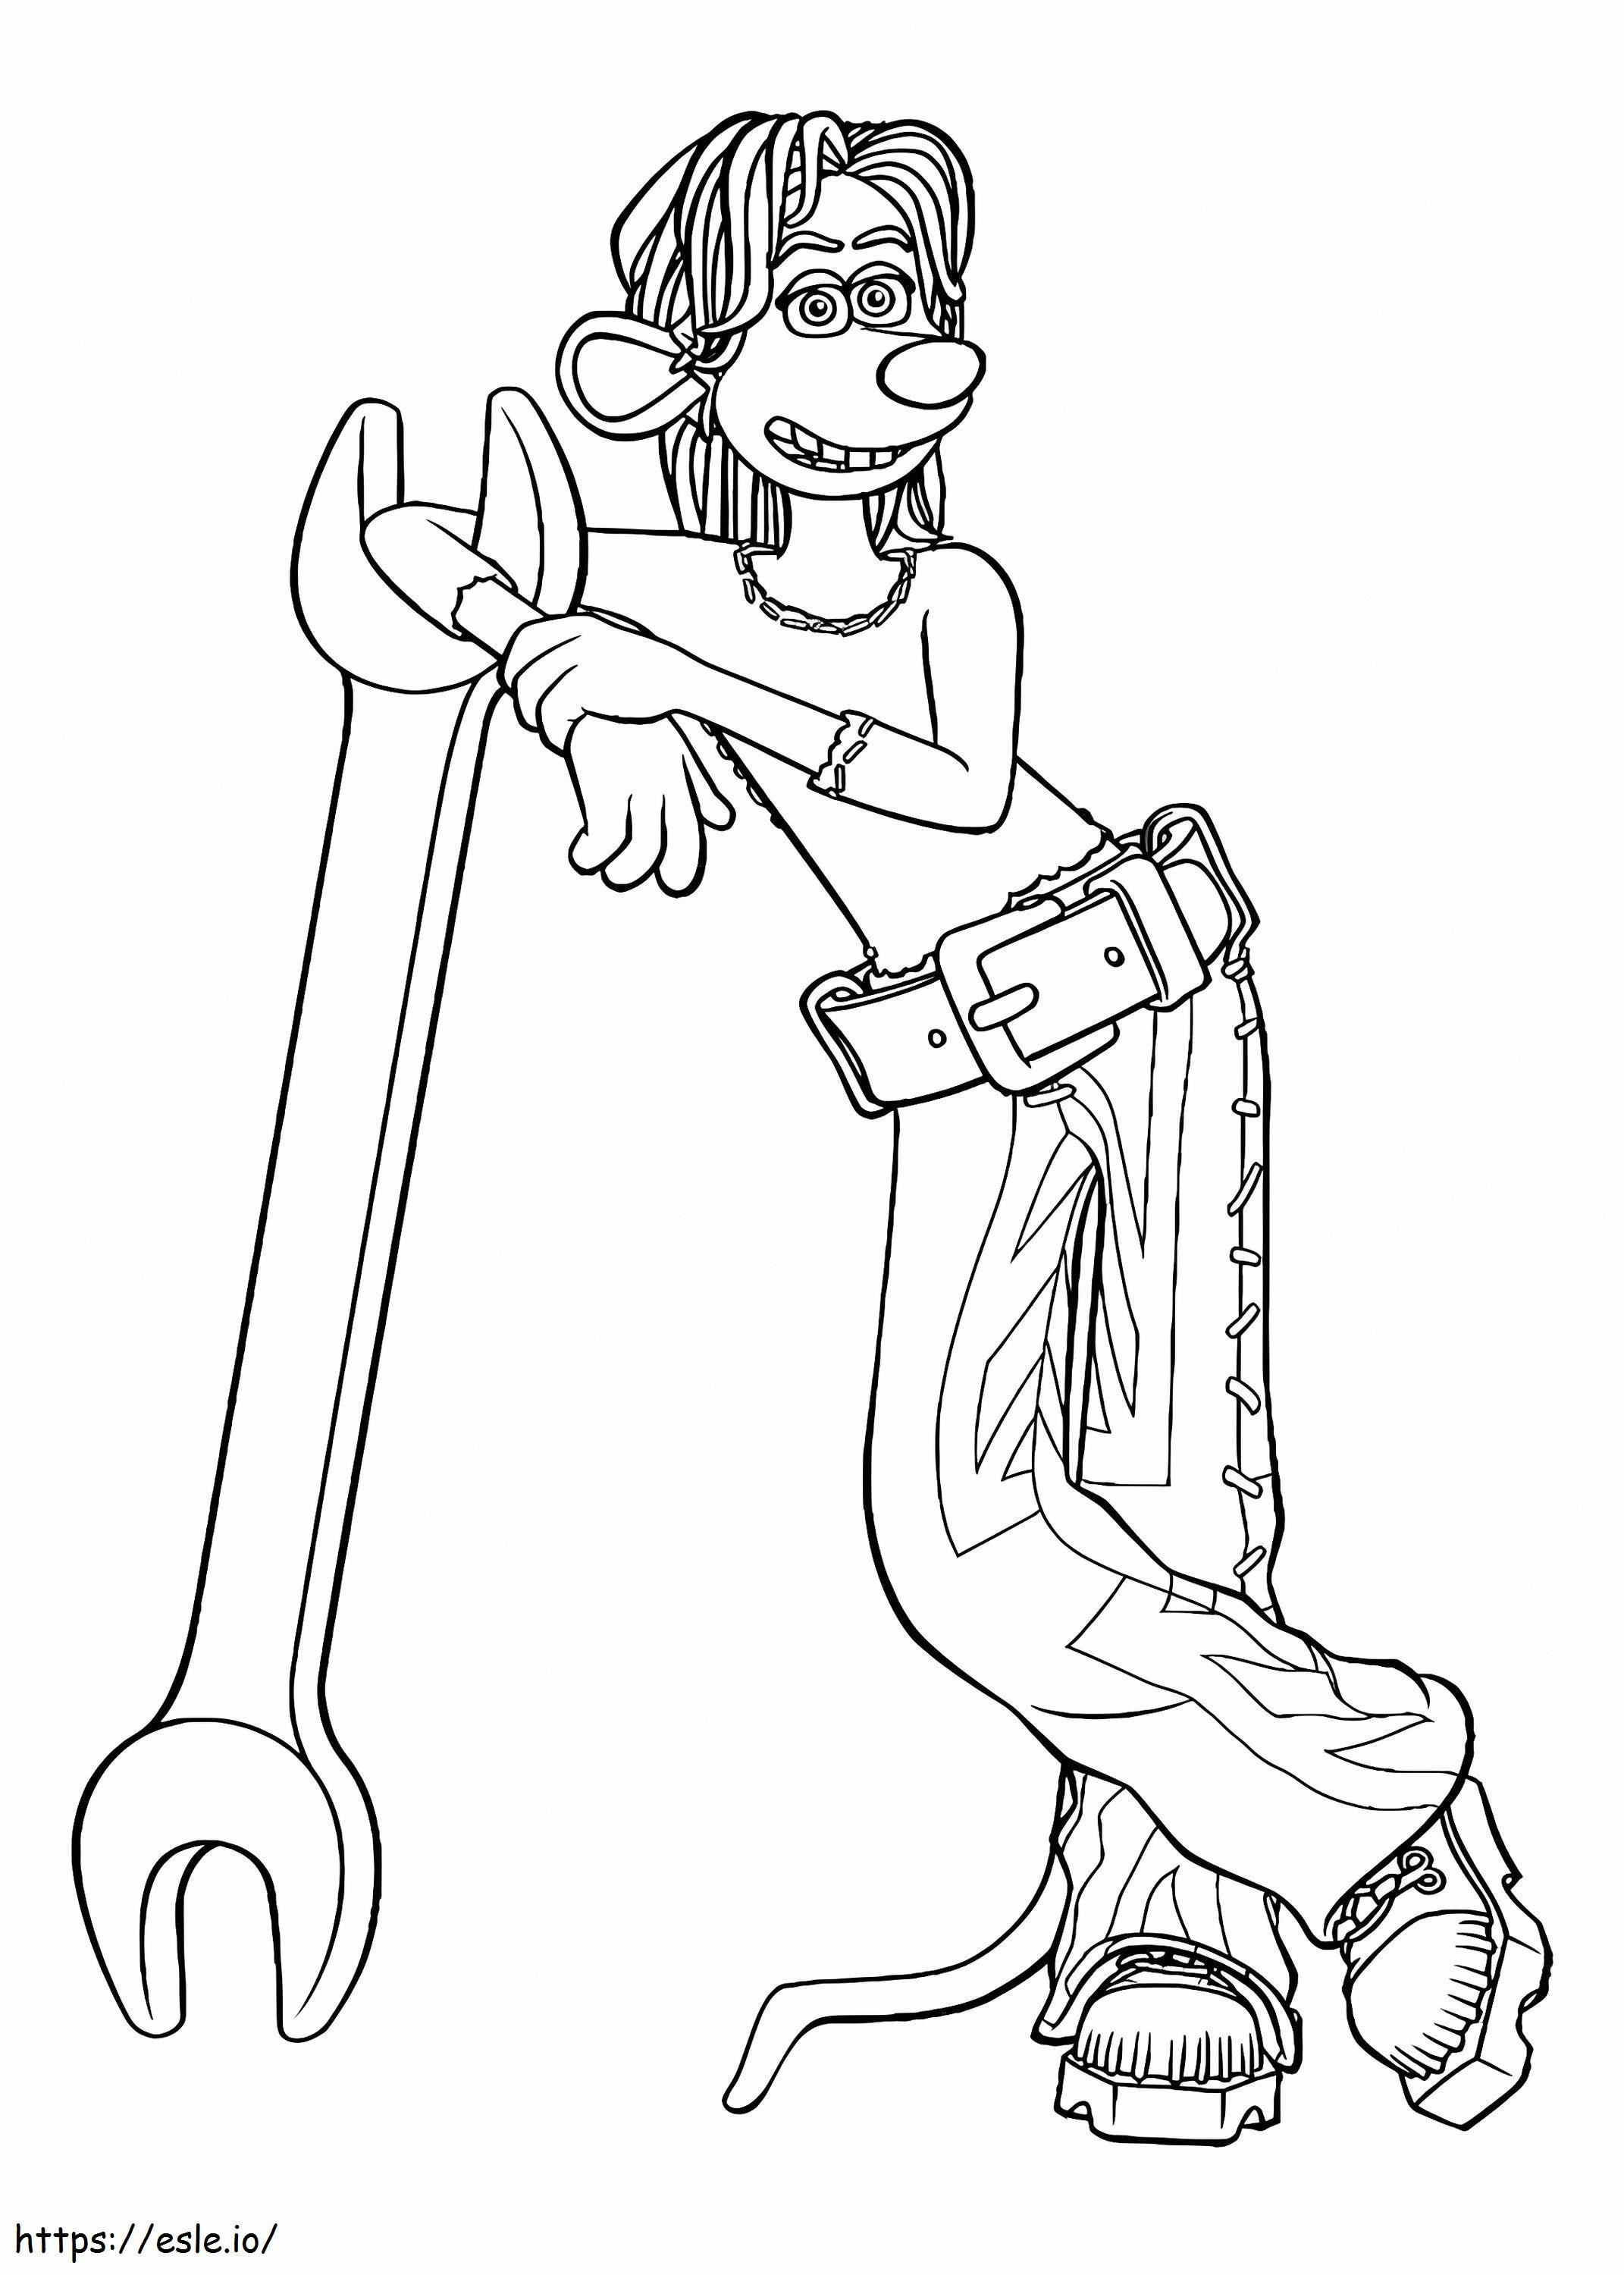 1535618944 Rita With Wrench A4 coloring page